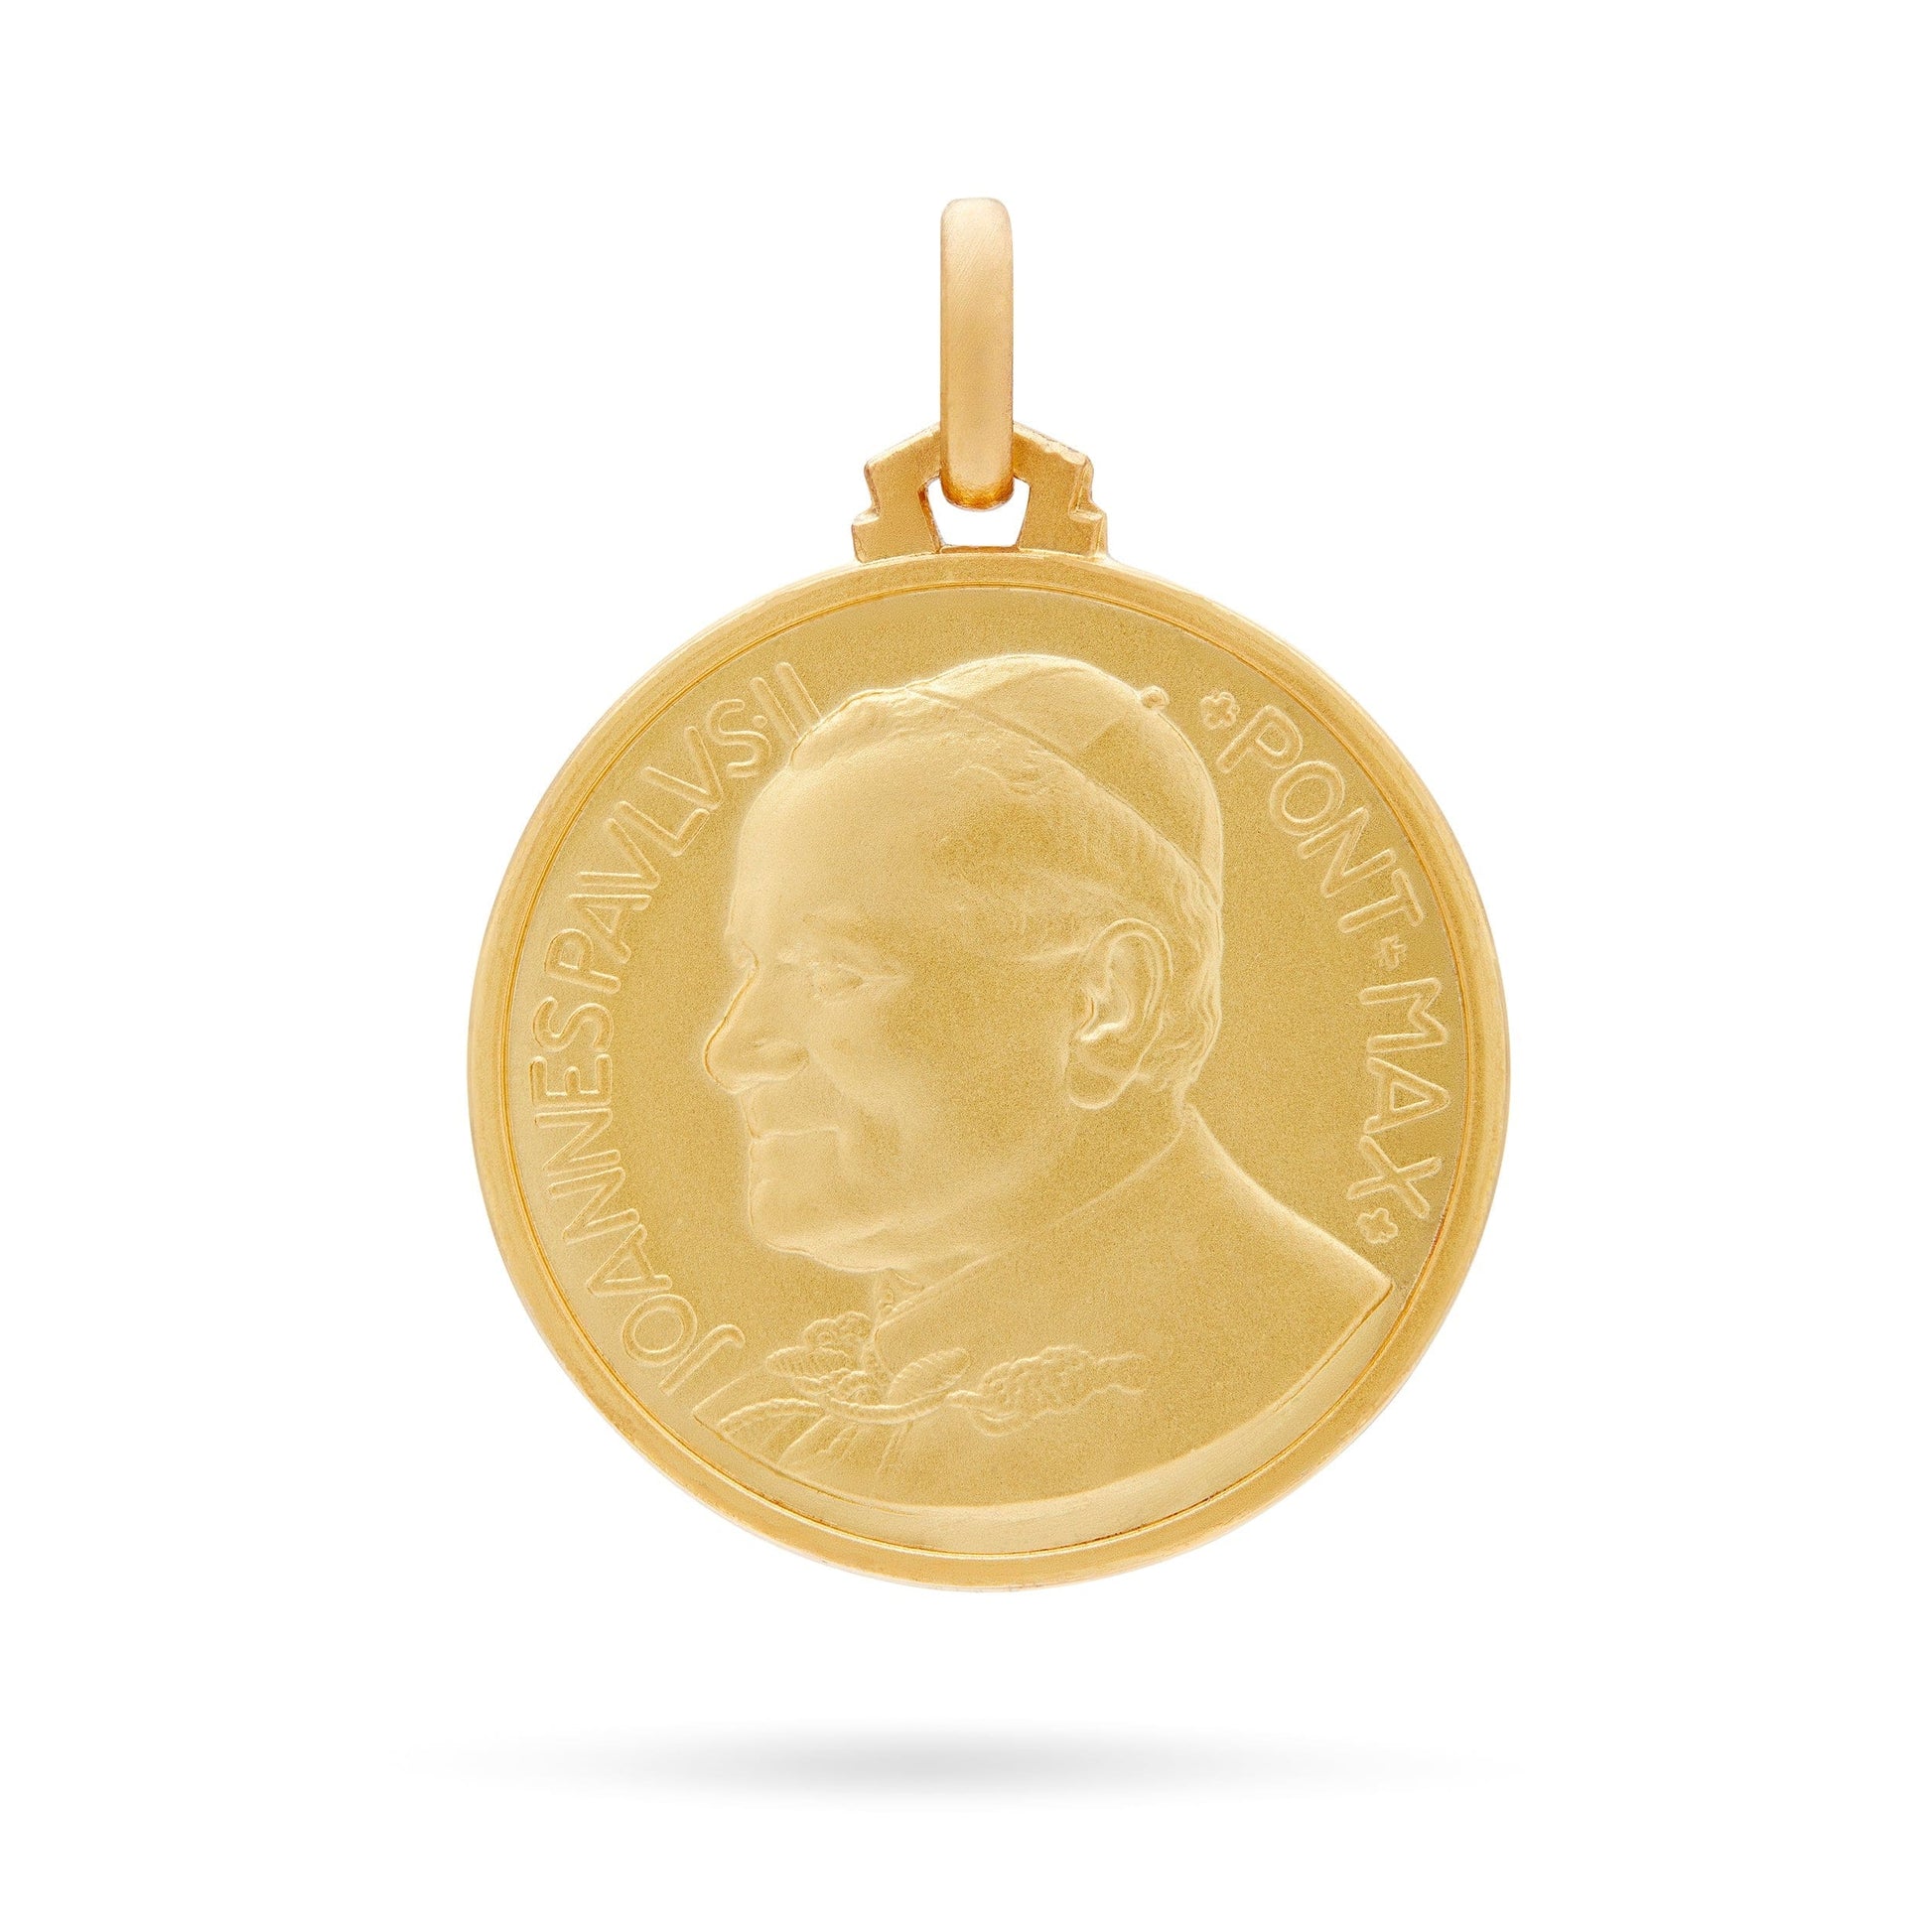 MONDO CATTOLICO Jewelry 10 mm (0.39 in) Double Sided Saint John Paul II Gold Medal